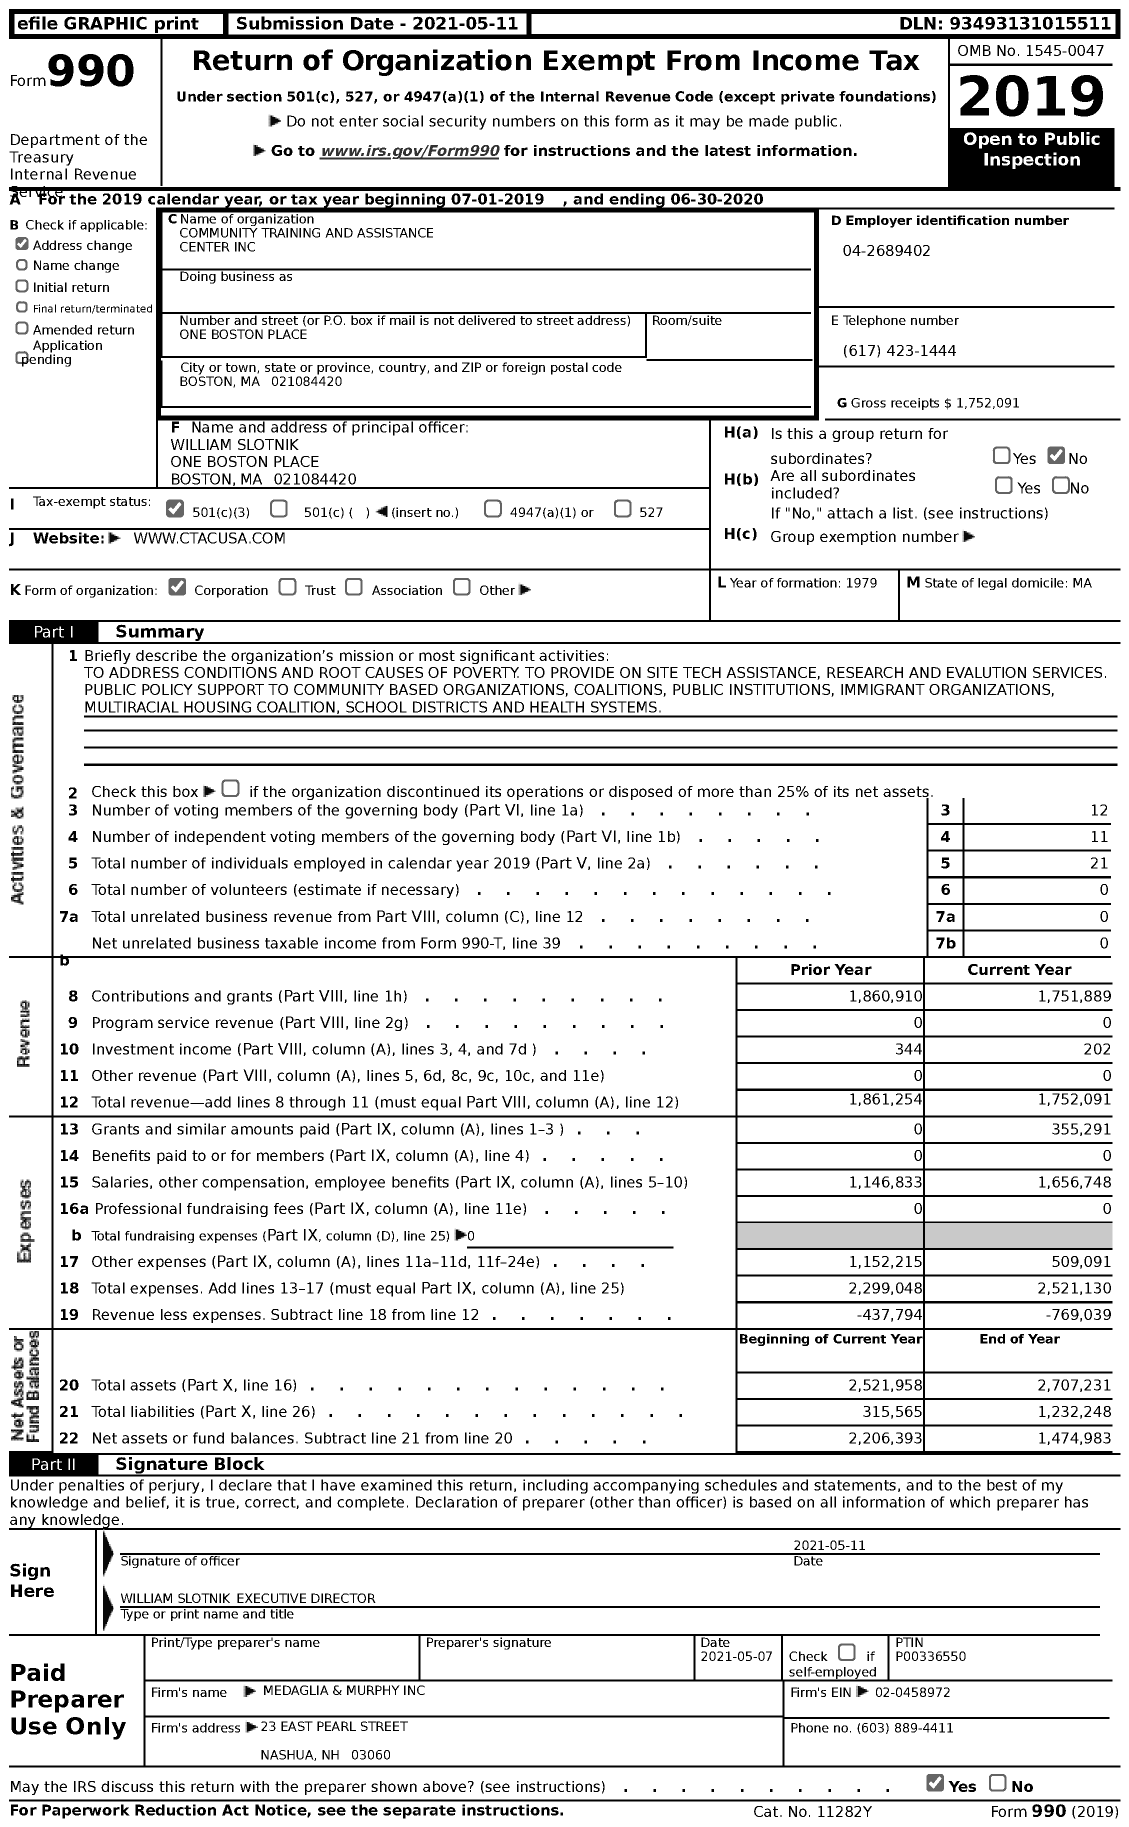 Image of first page of 2019 Form 990 for Community Training and Assistance Center